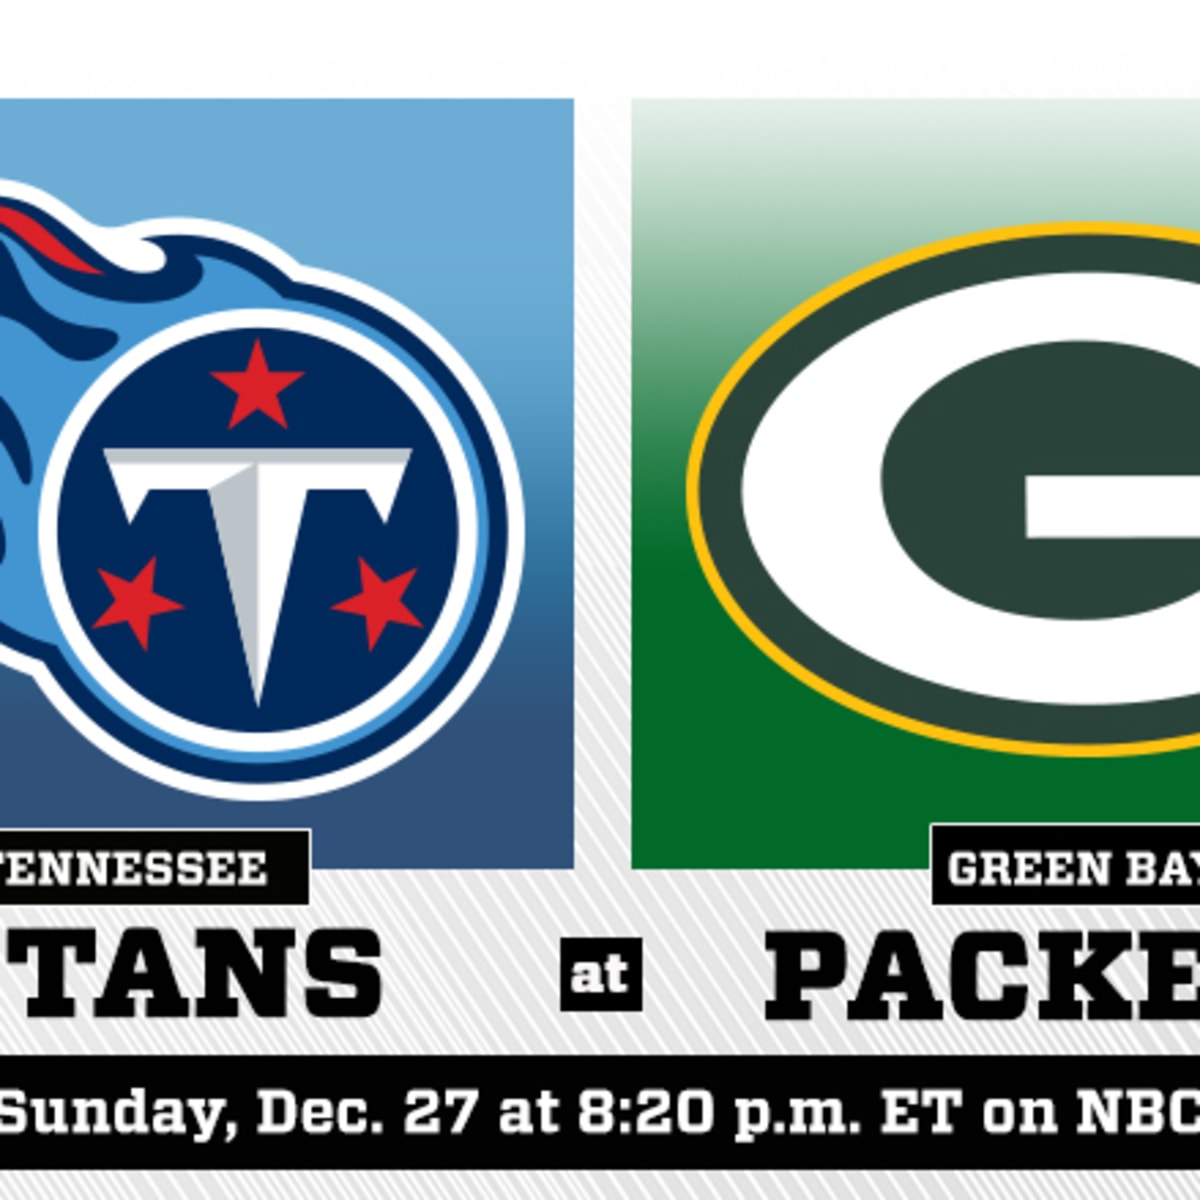 green bay and the titans